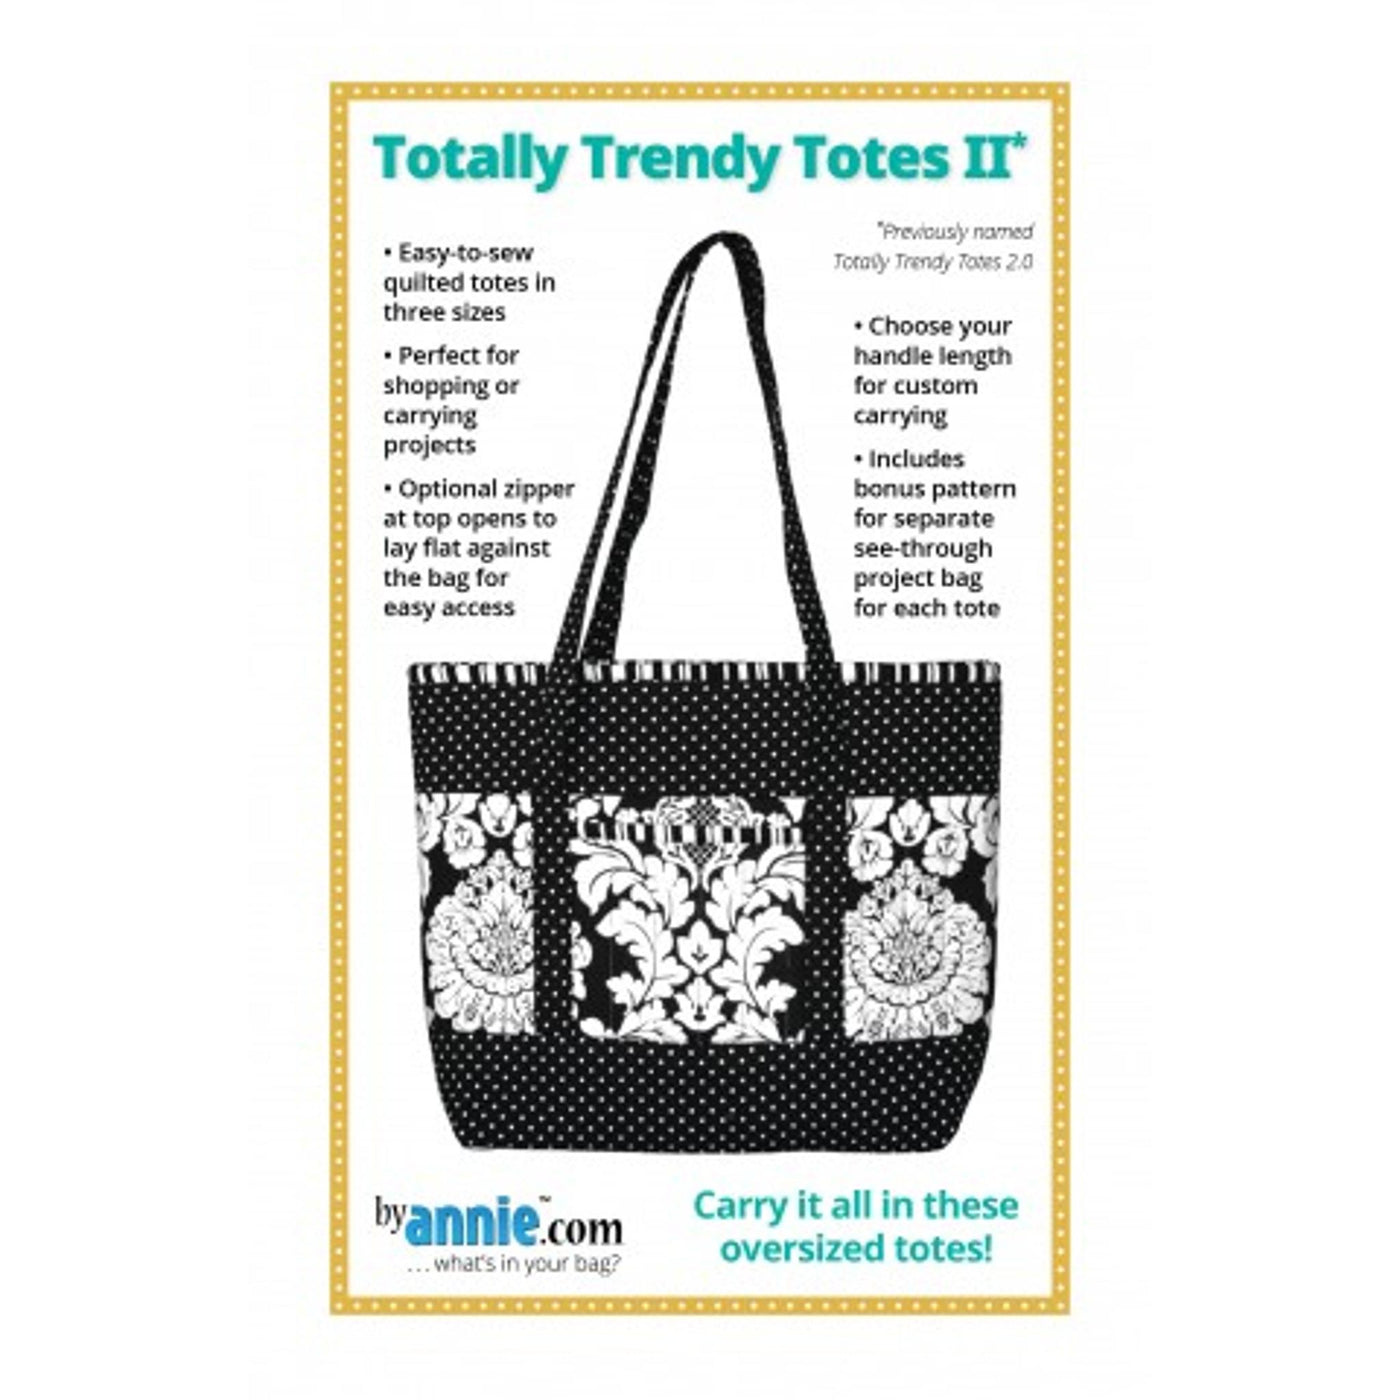 Totally Trendy Totes II